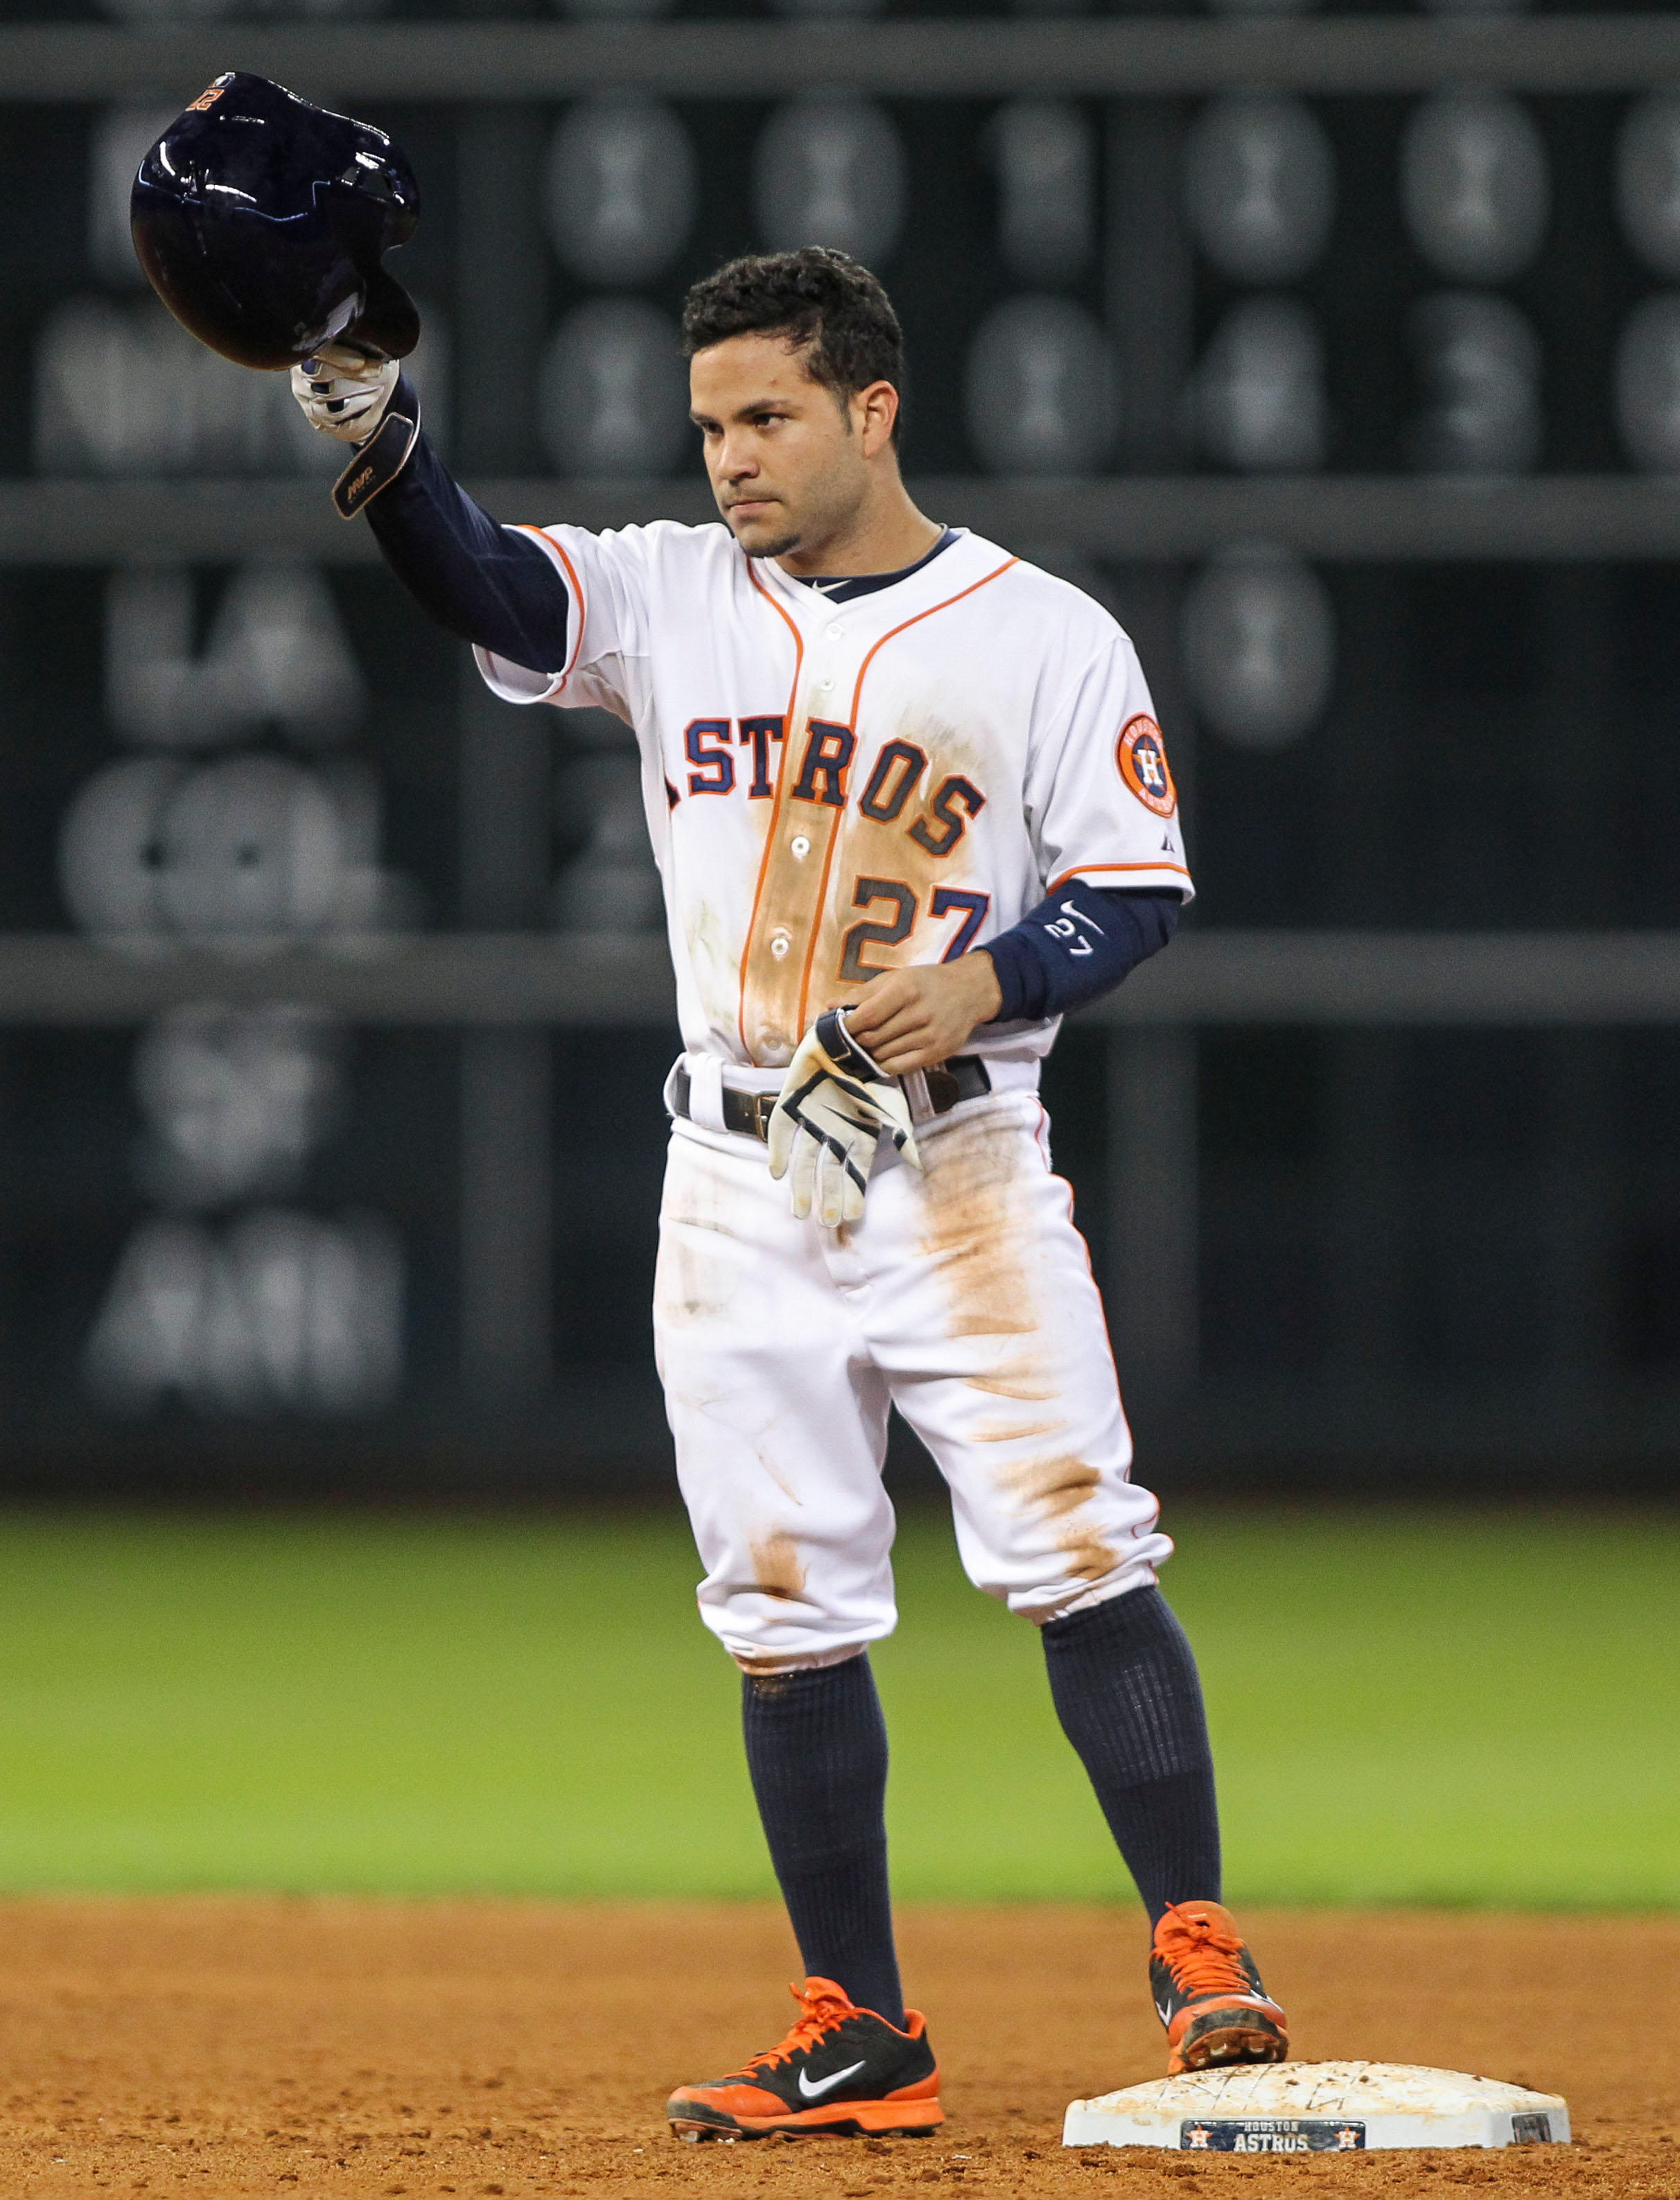 Hits keep coming for Astros' Jose Altuve